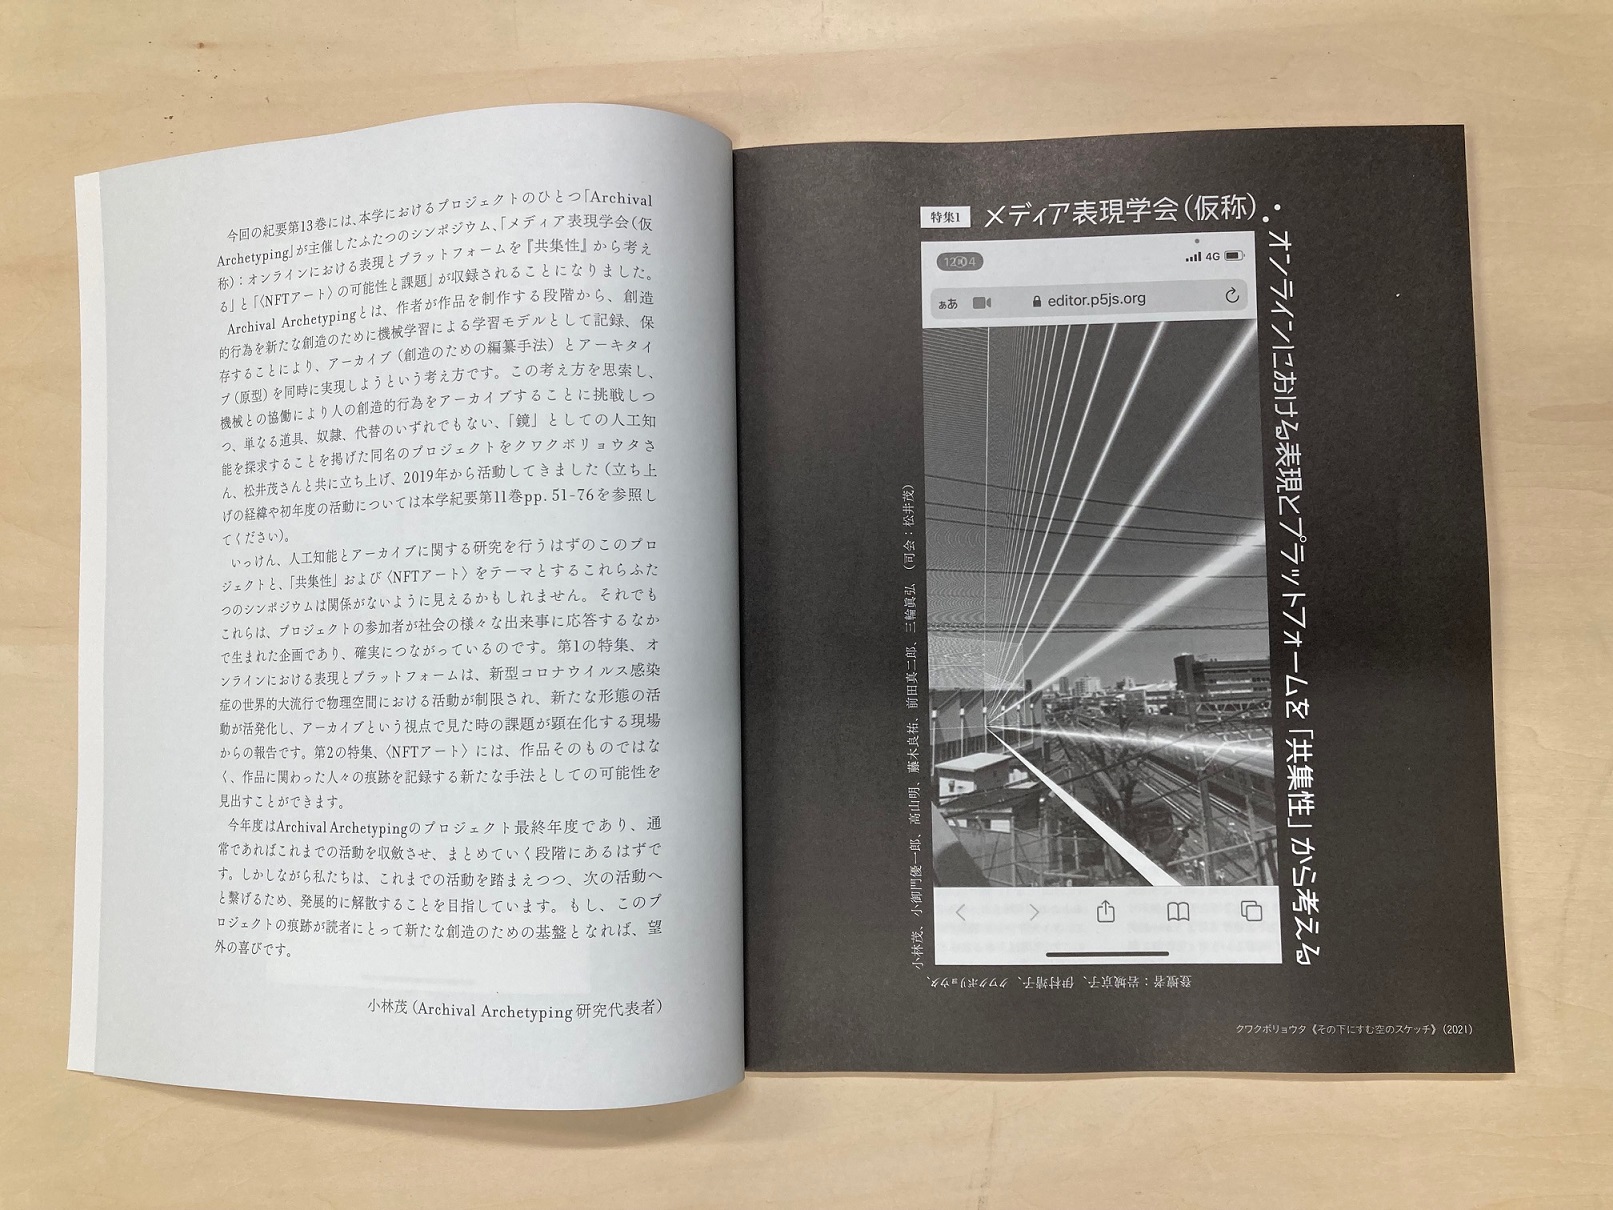 Journal of Institute of Advanced Media Arts and Sciences, Vol. 13イメージ